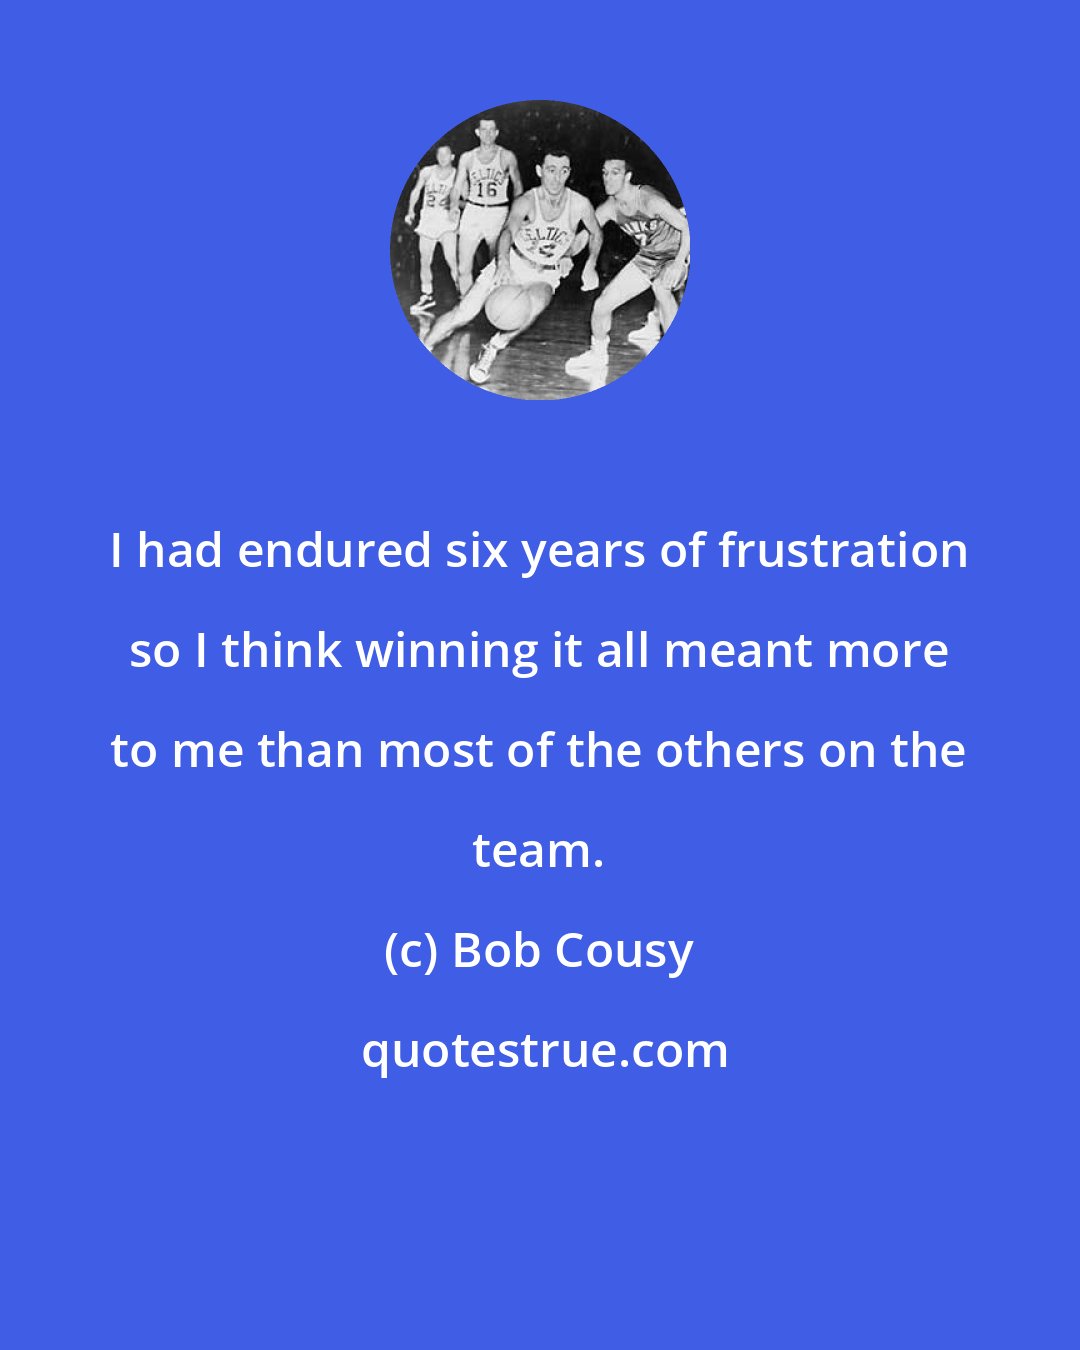 Bob Cousy: I had endured six years of frustration so I think winning it all meant more to me than most of the others on the team.